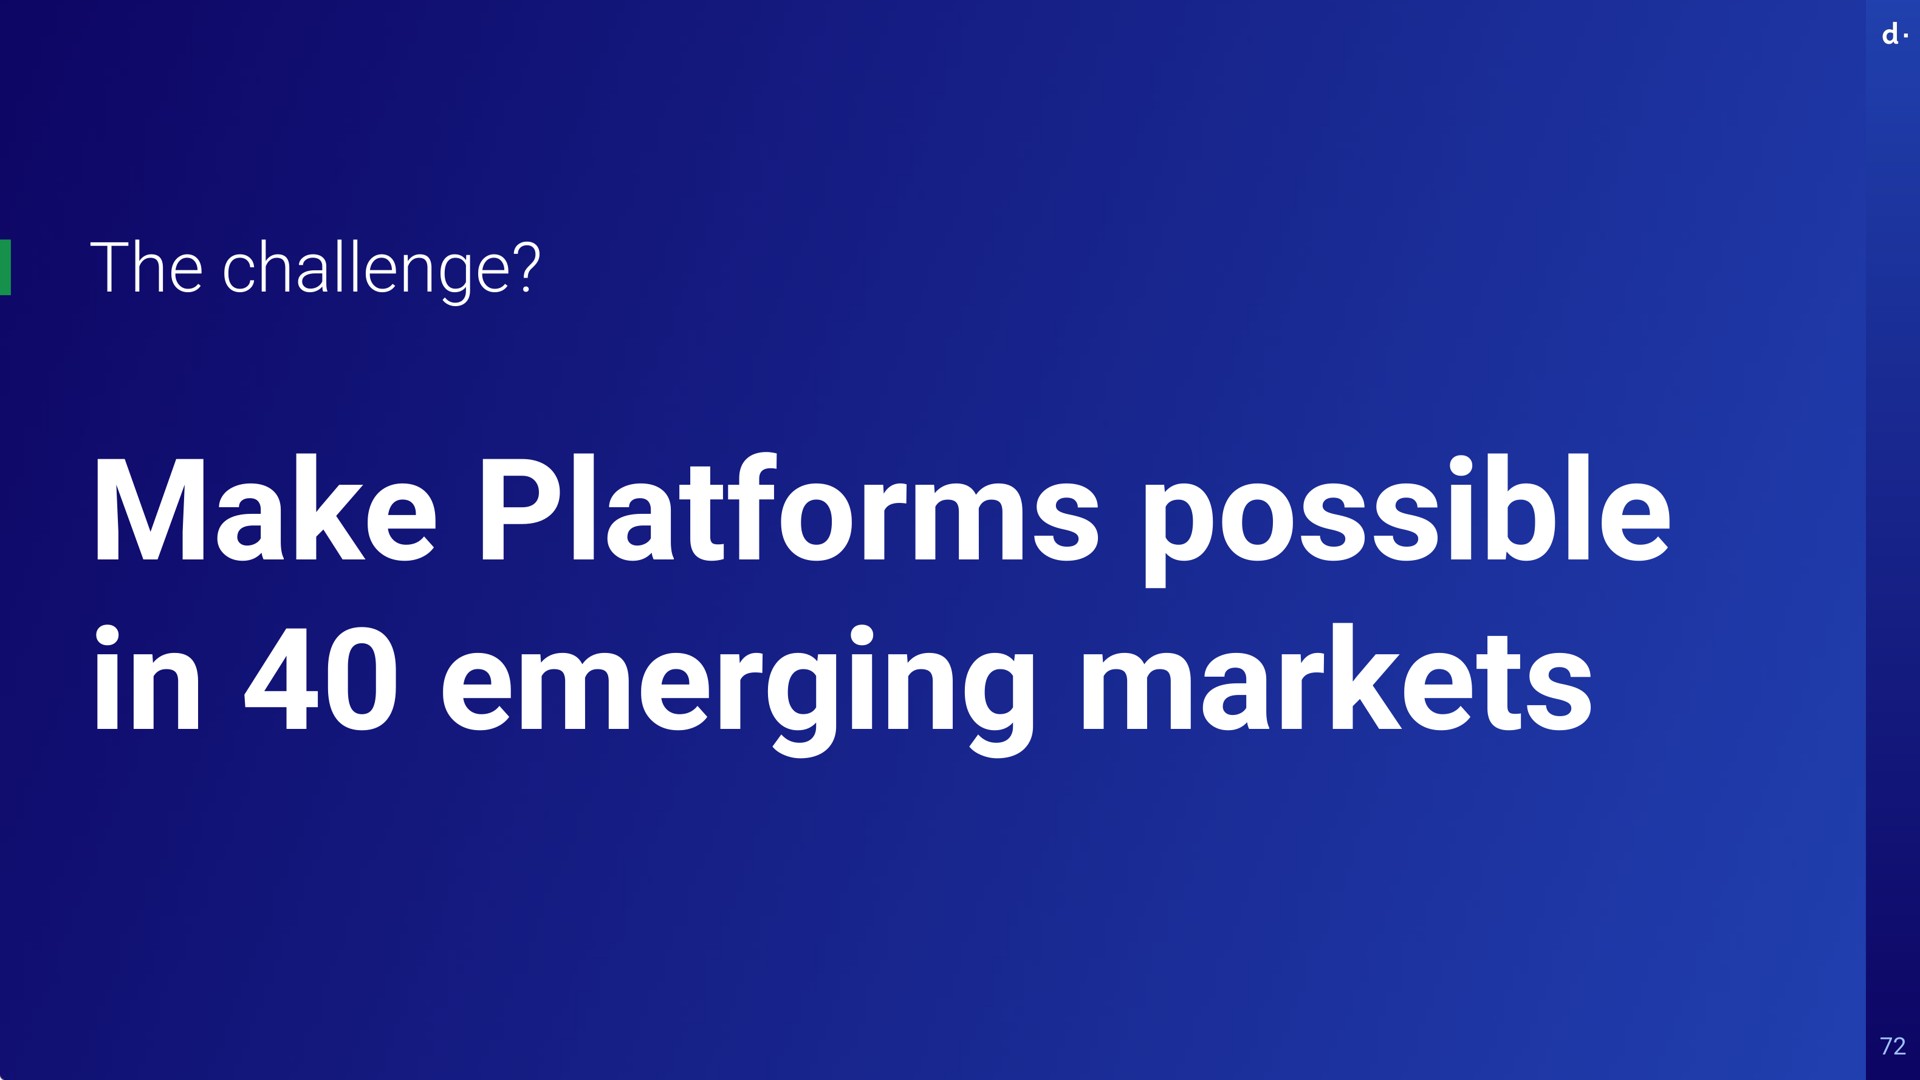 end to end solution for and other platforms to clients process payments manage funds and settle locally or abroad the challenge make platforms possible in emerging markets tam | dLocal